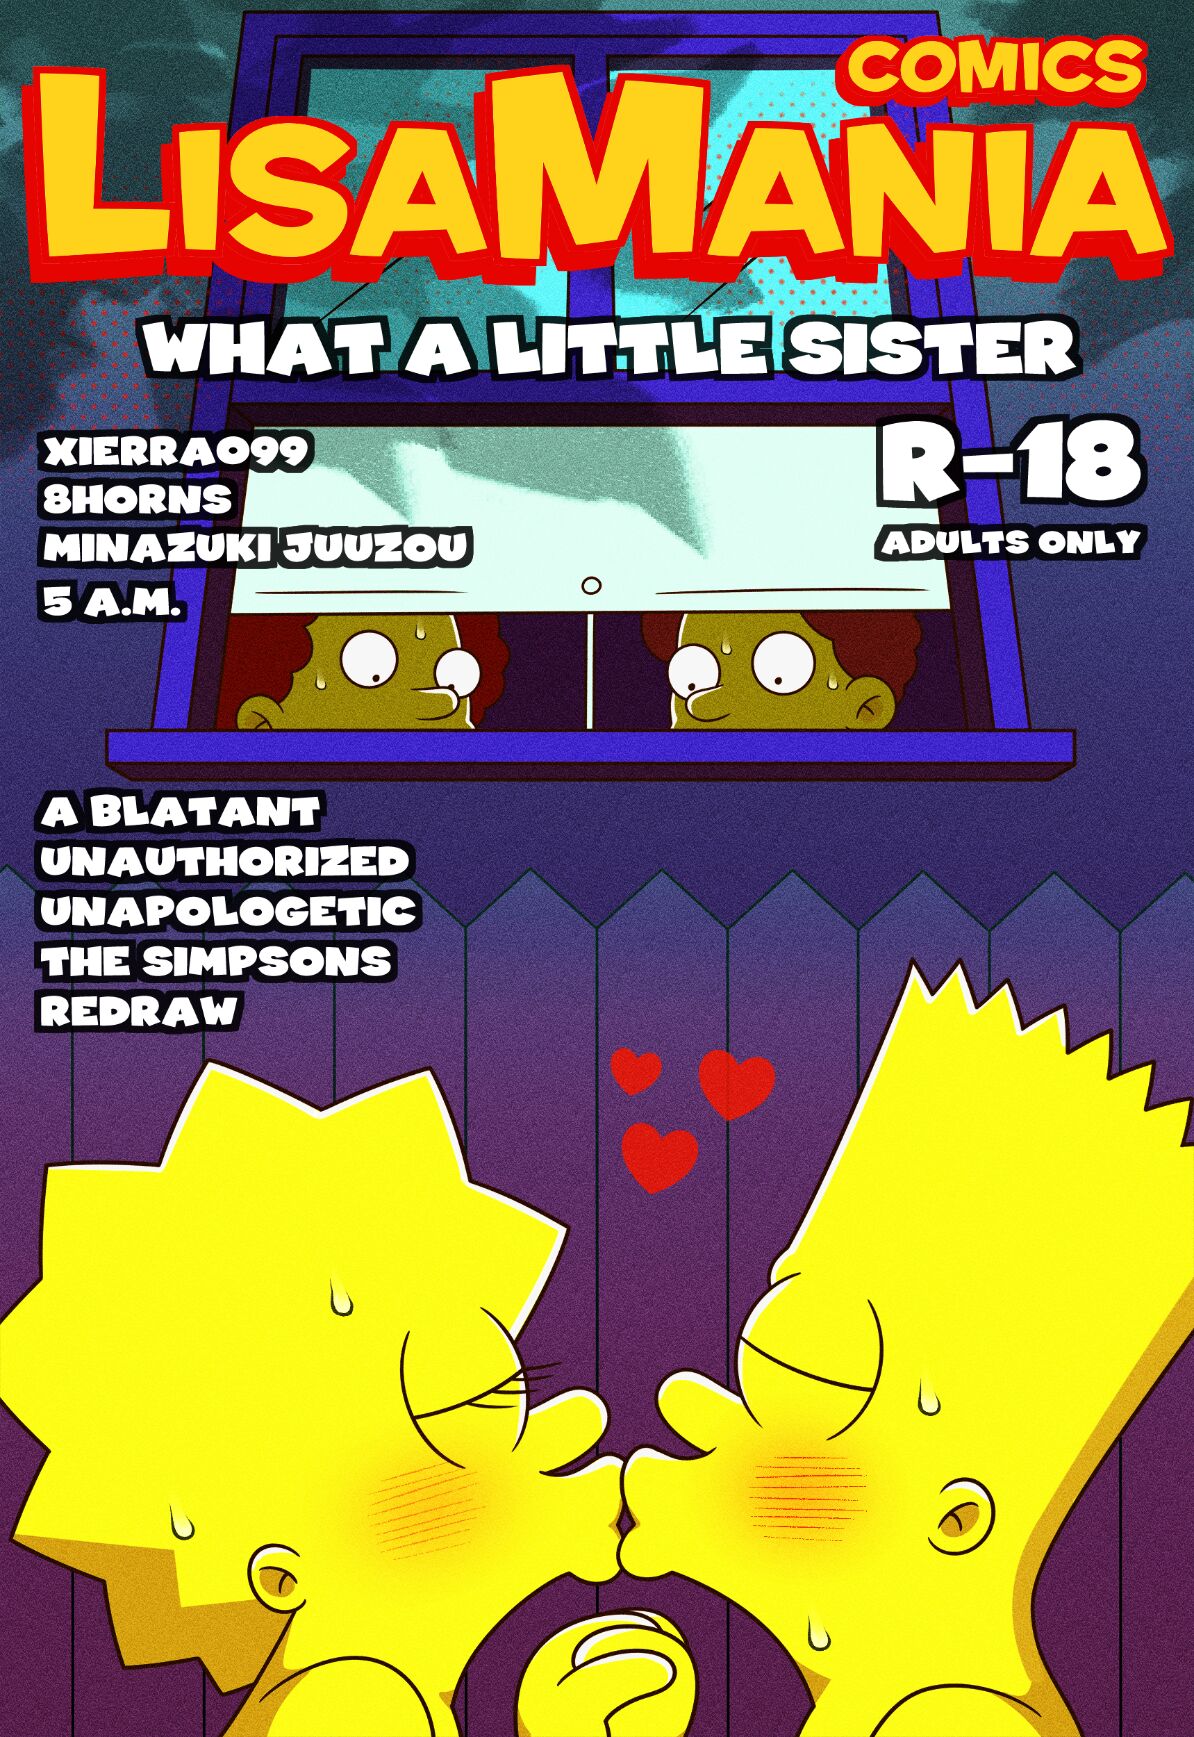 Simpsons Lesbian Comic - What a little sister. LisaMania 2023 (The Simpsons) - FreeAdultComix